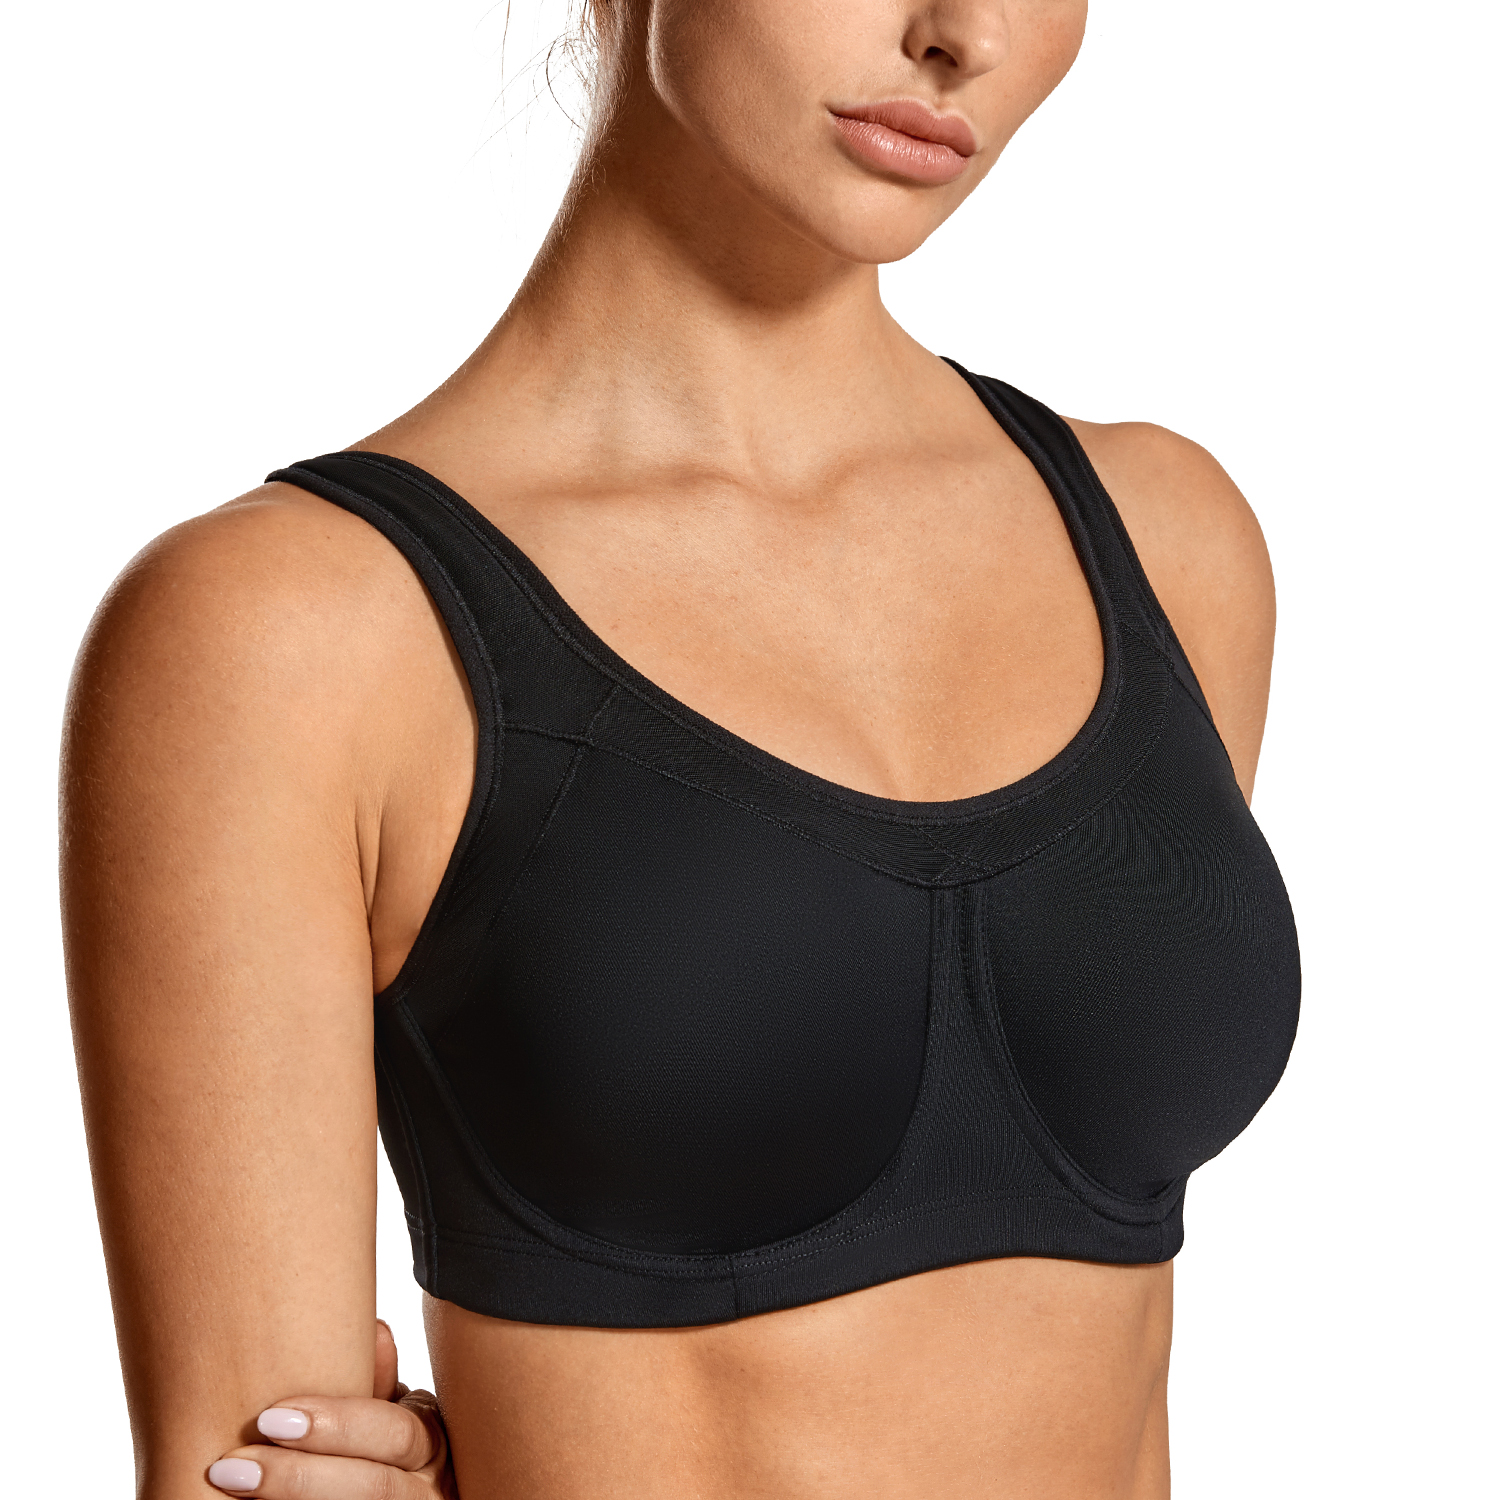 SYROKAN Women's High Impact Support Wirefree Bounce Control Plus Size  Workout Sports Bra Black/Grey-1